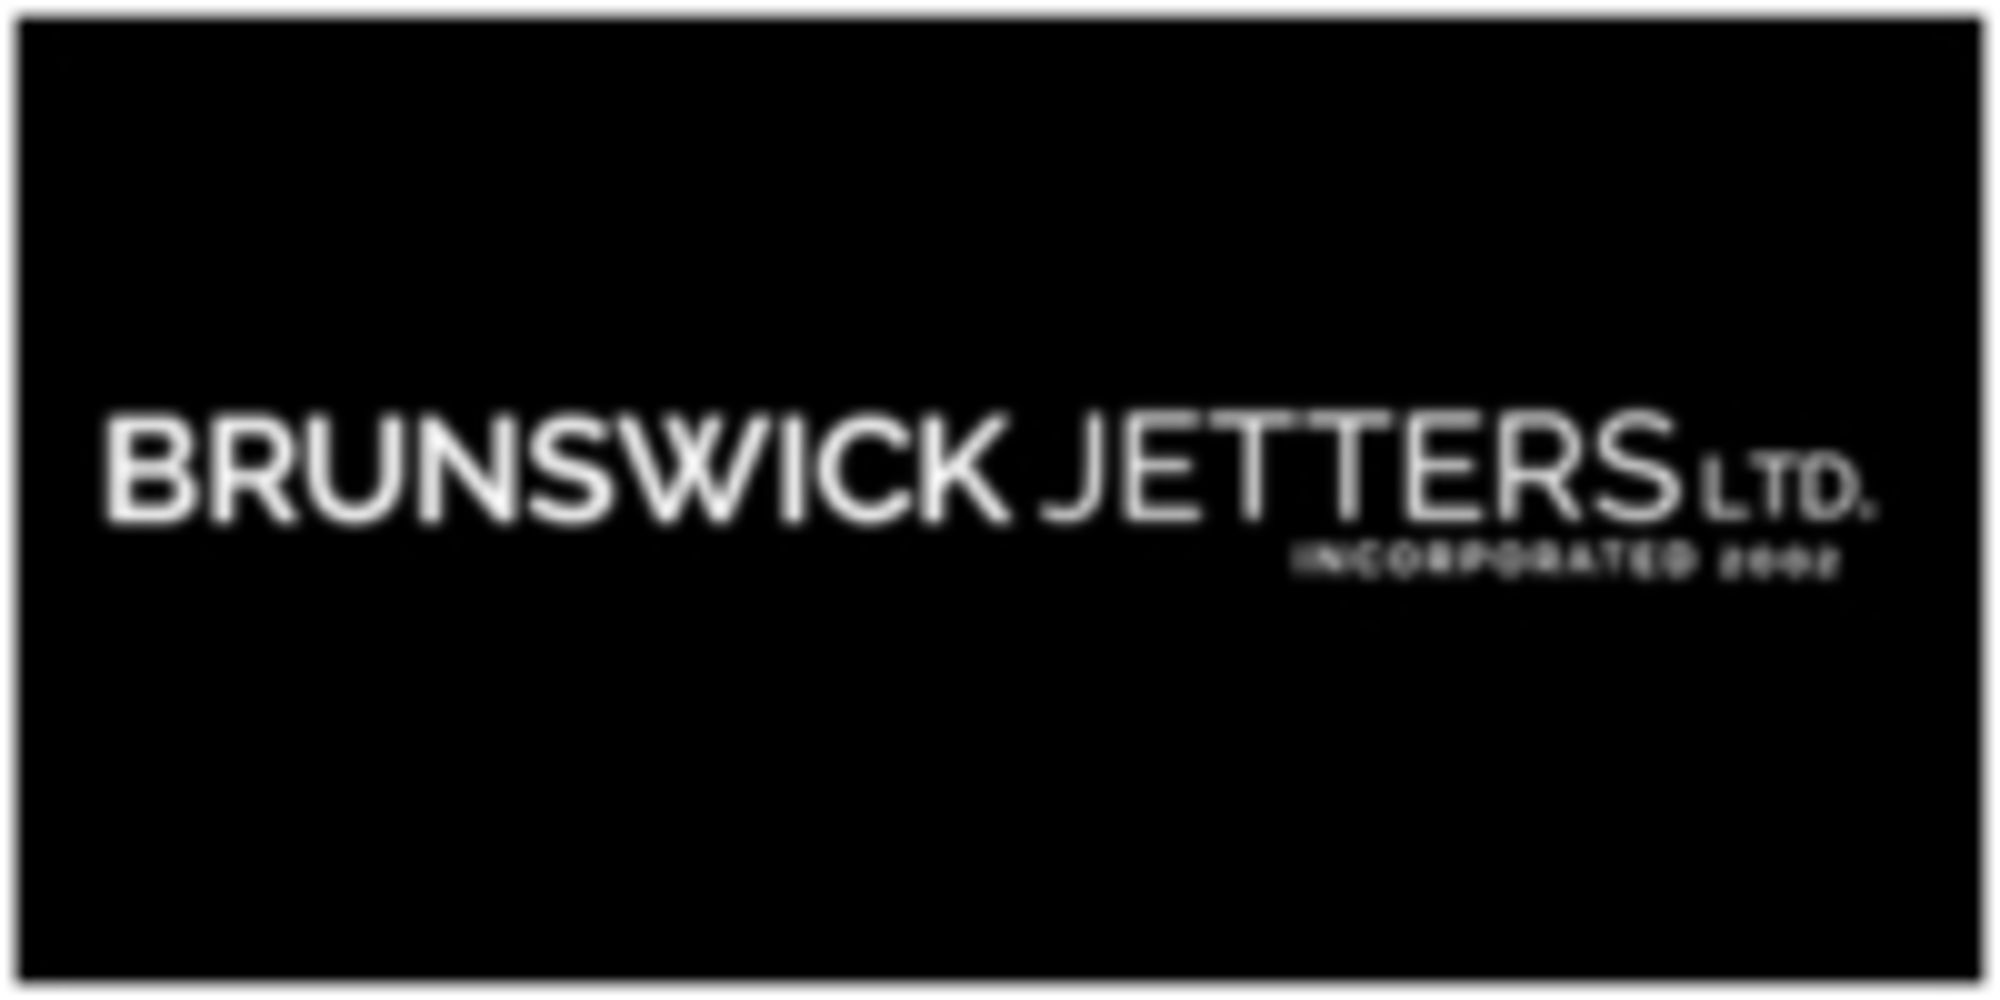 Brunswick Jetters - Online Auction Featuring Vessels & Intangible Property From An Innovative & Patented Aquaculture Net Washing Company